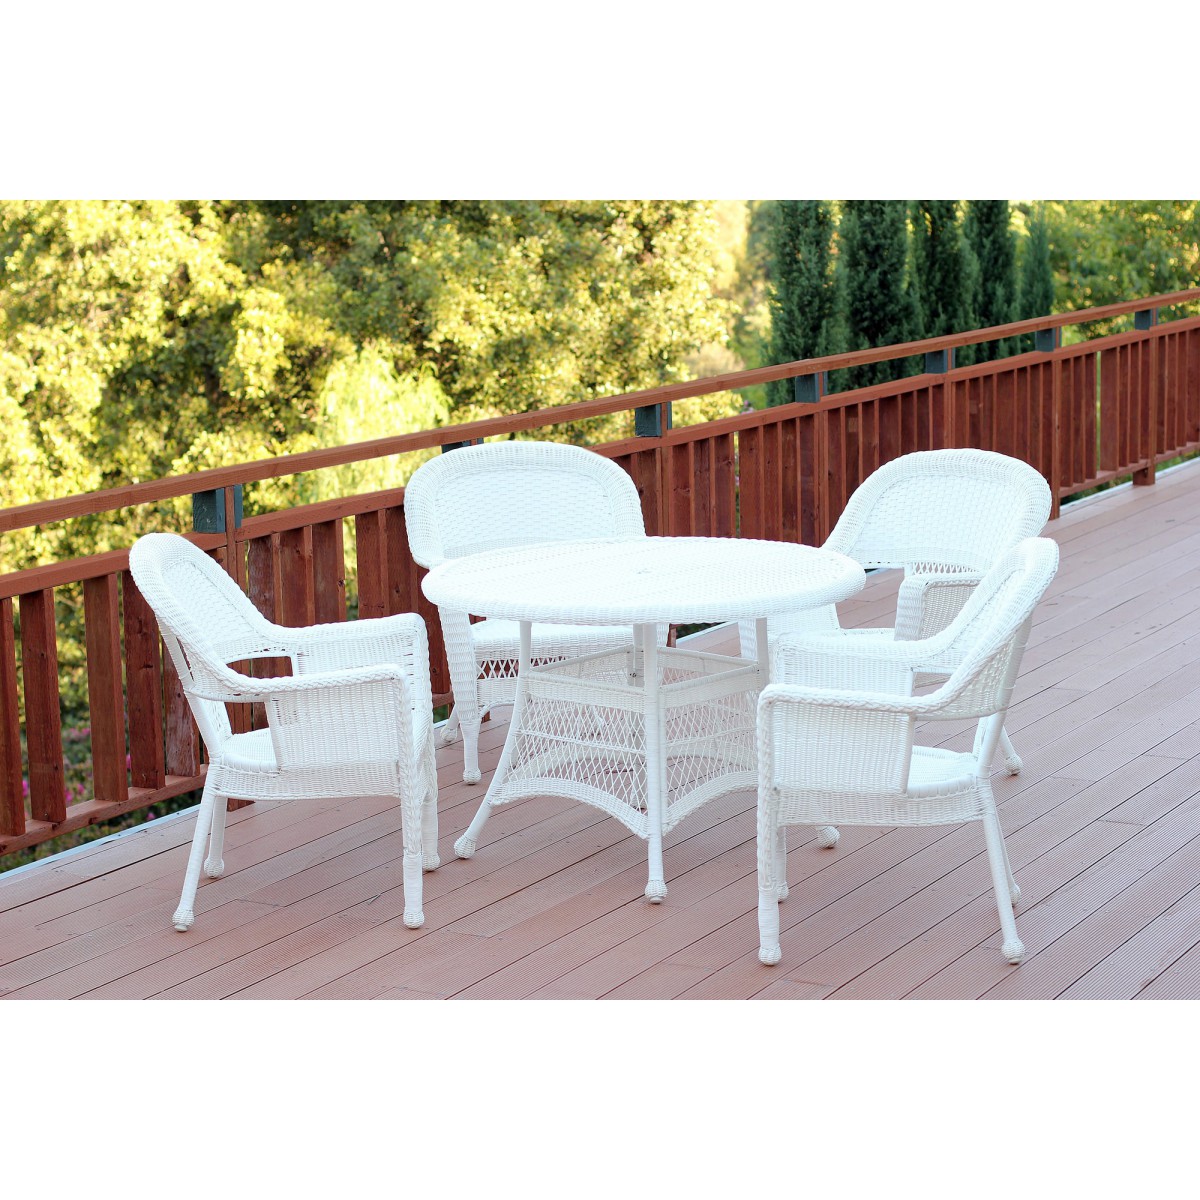 5pc White Wicker Dining Set Without Cushion